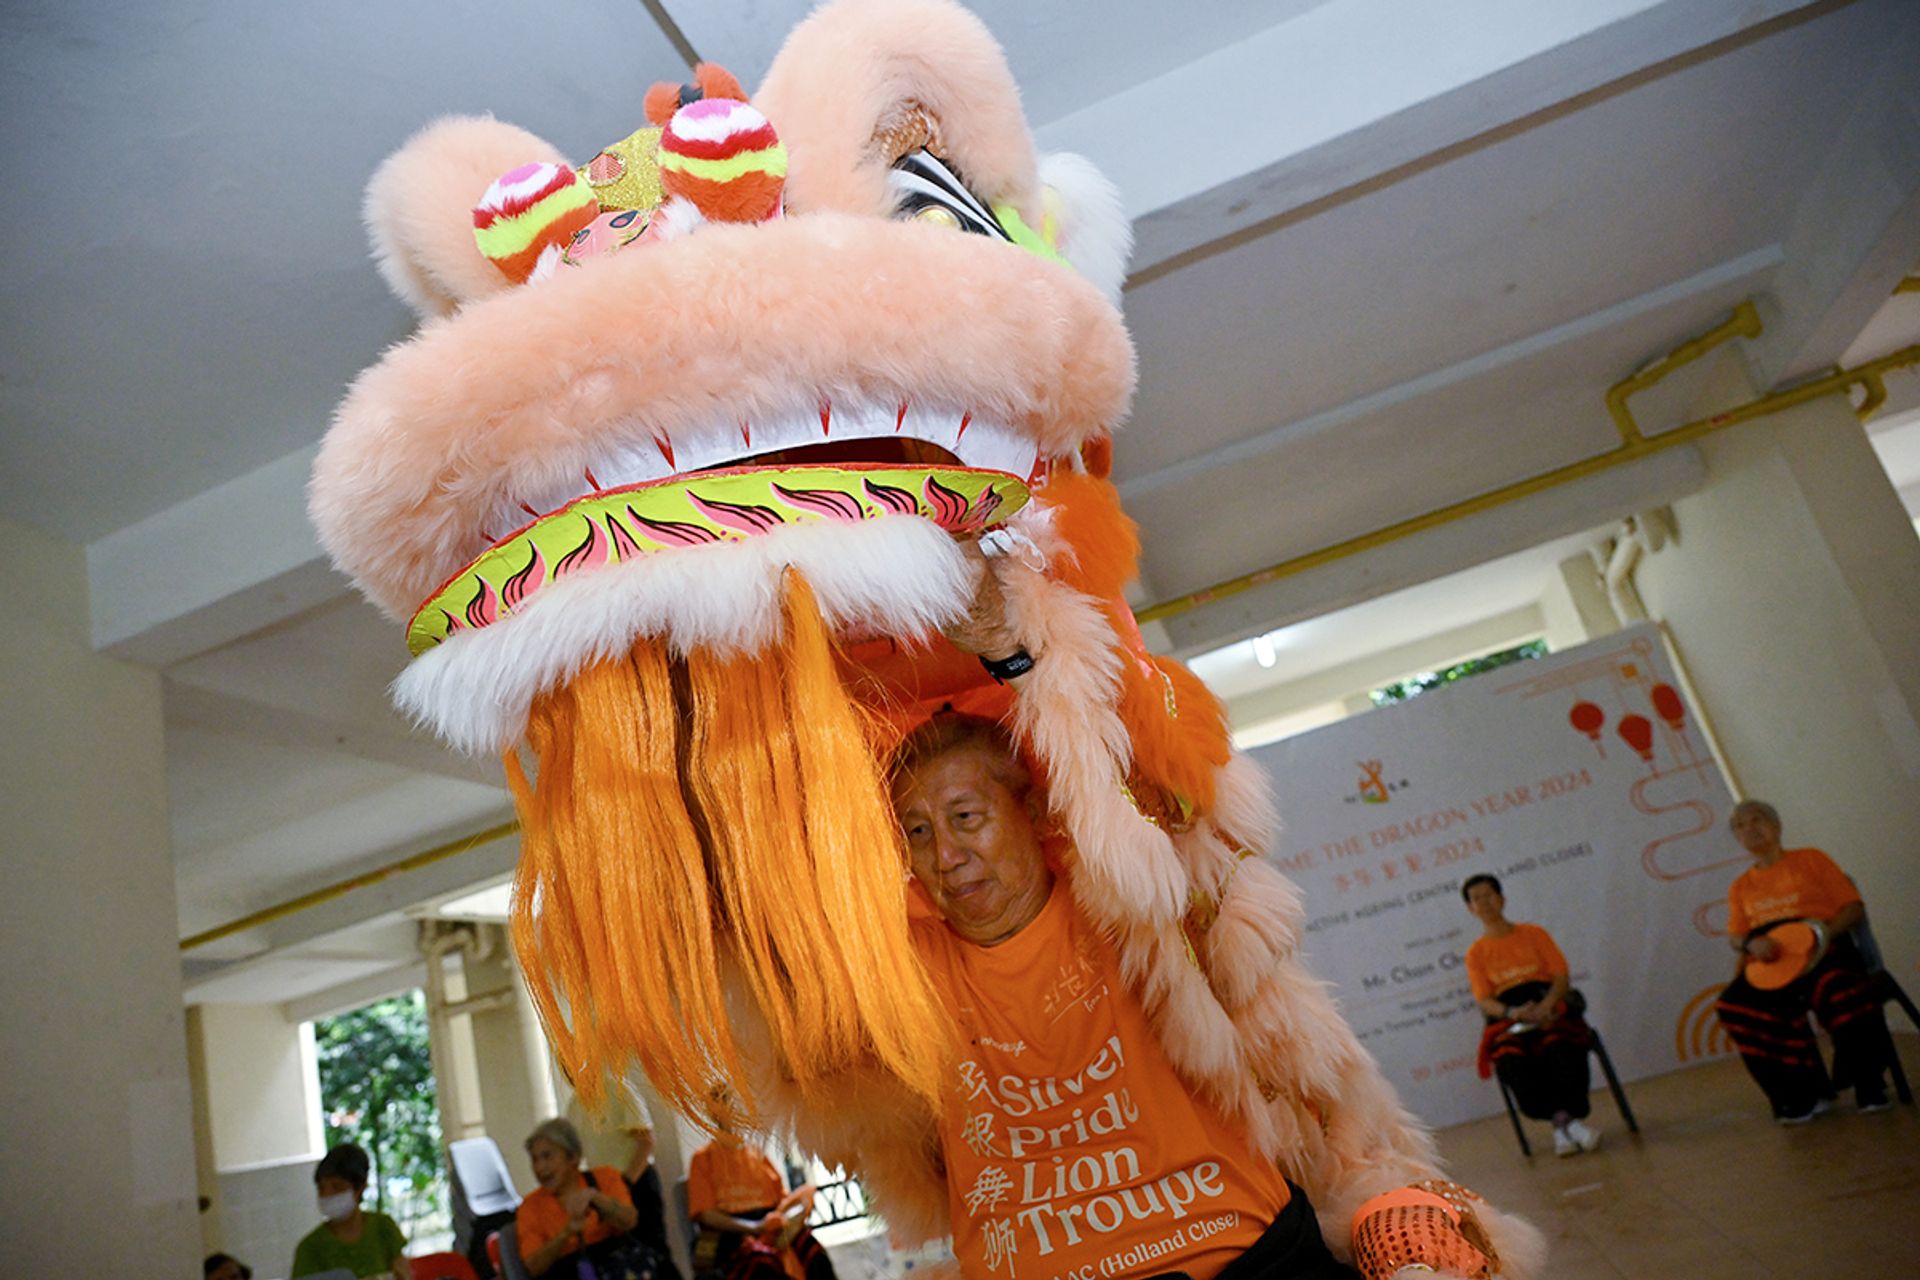 Mr Chia Chiang Teck hoisting the lion head as he performs.